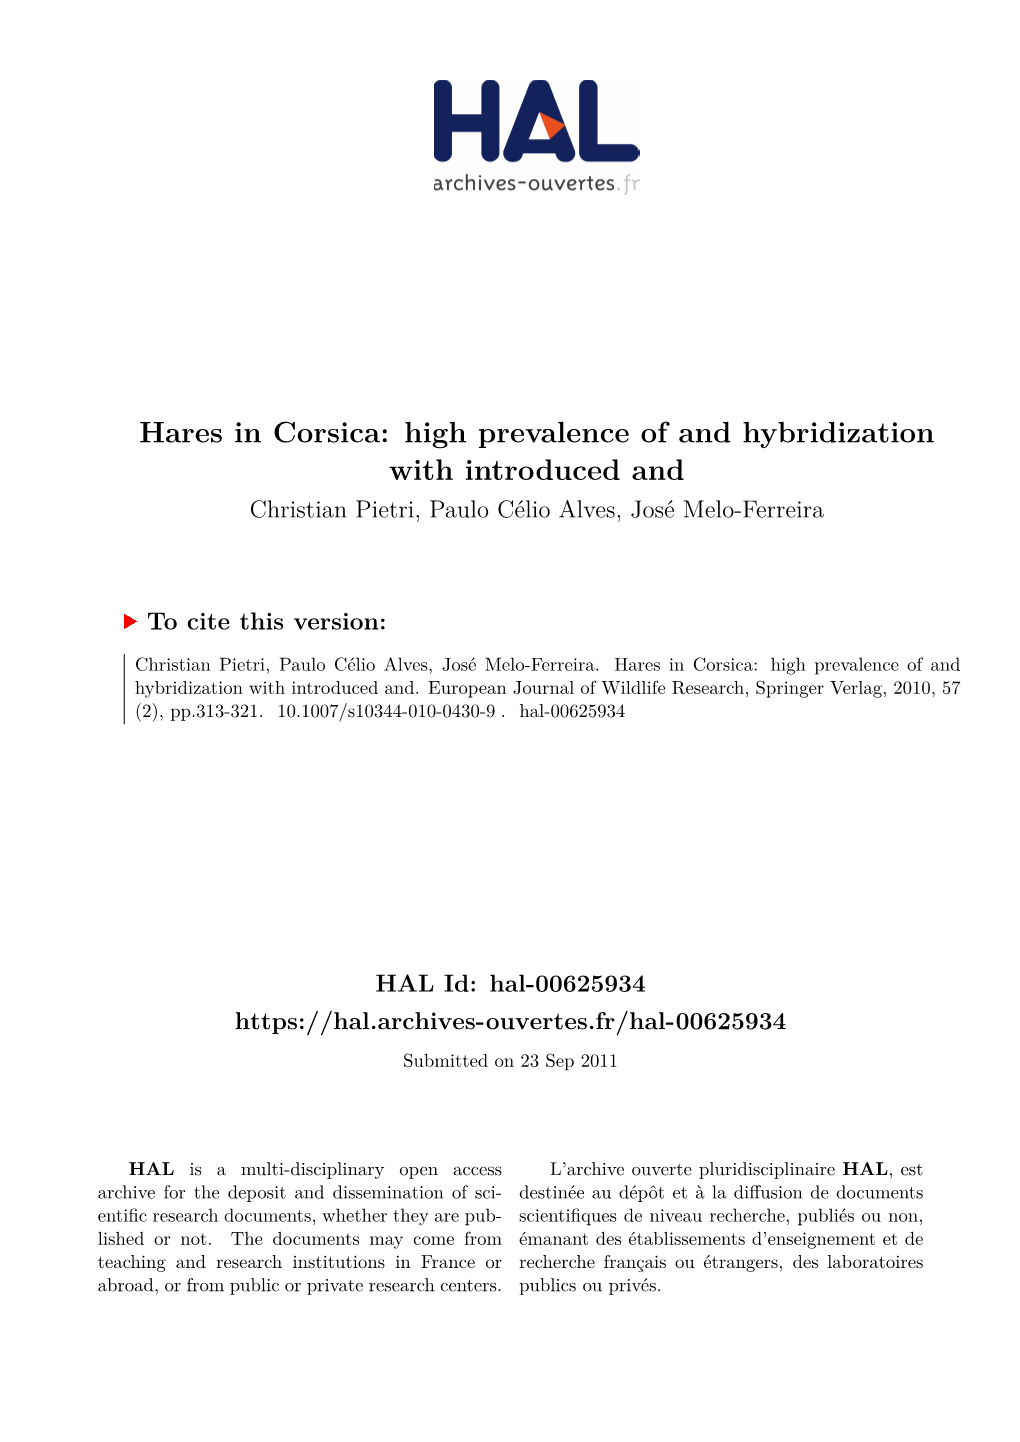 Hares in Corsica: High Prevalence of and Hybridization with Introduced and Christian Pietri, Paulo Célio Alves, José Melo-Ferreira